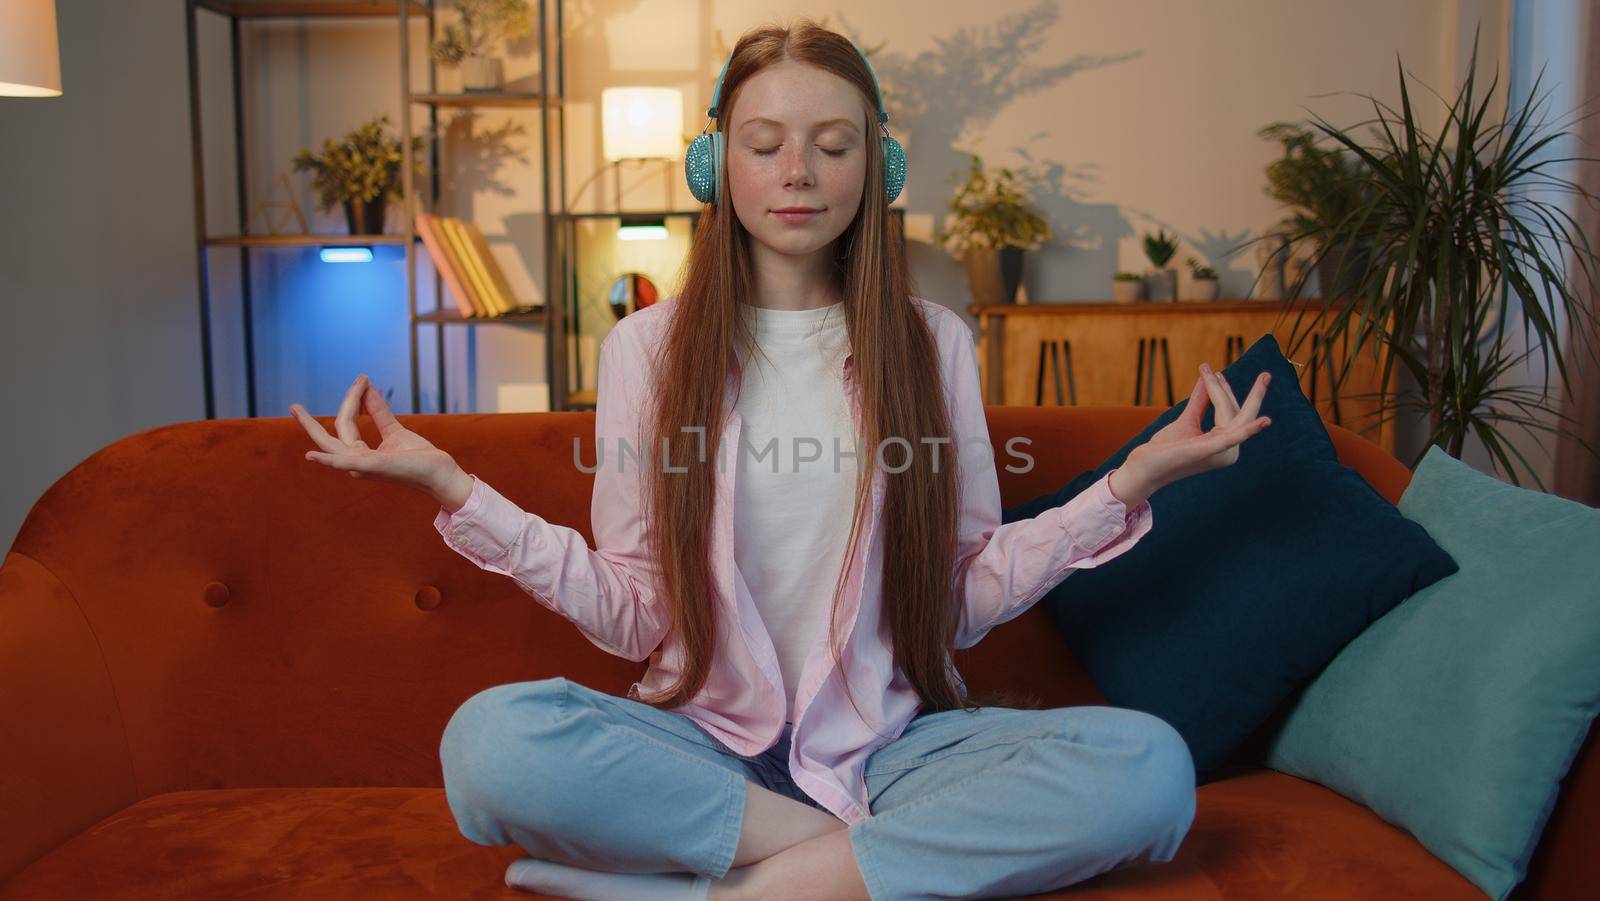 Keep calm down, relax, inner balance. Young redhead child girl breathes deeply with mudra gesture eyes closed meditating with concentrated thoughts, peaceful mind sit at home in living room on couch